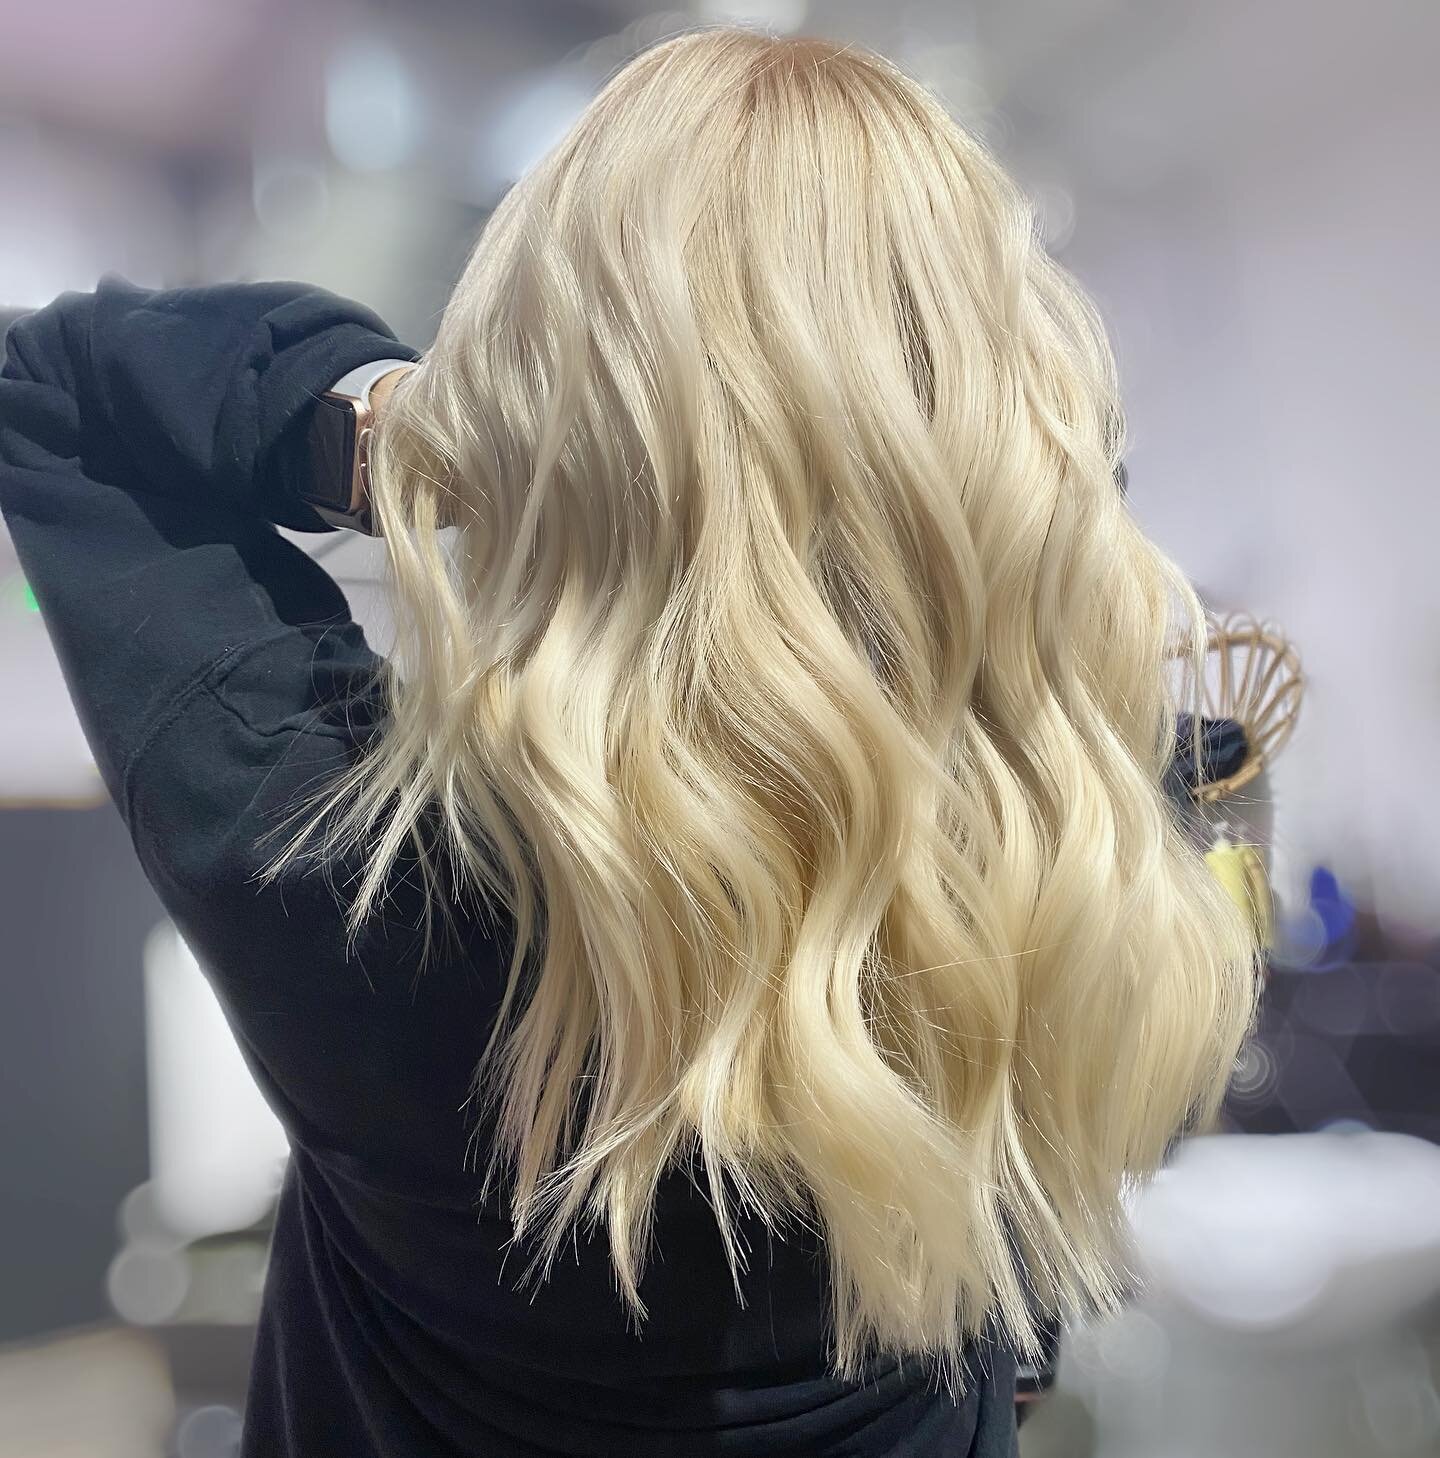 I dream about this blonde hair.
&bull;
&bull;
Lifted with @wellahair 10/8KP.
Styled with @oribe Maximista and @bioionic_pro Long Barrel 1.25in Curling Iron
&bull;
&bull;
@behindthechair_com